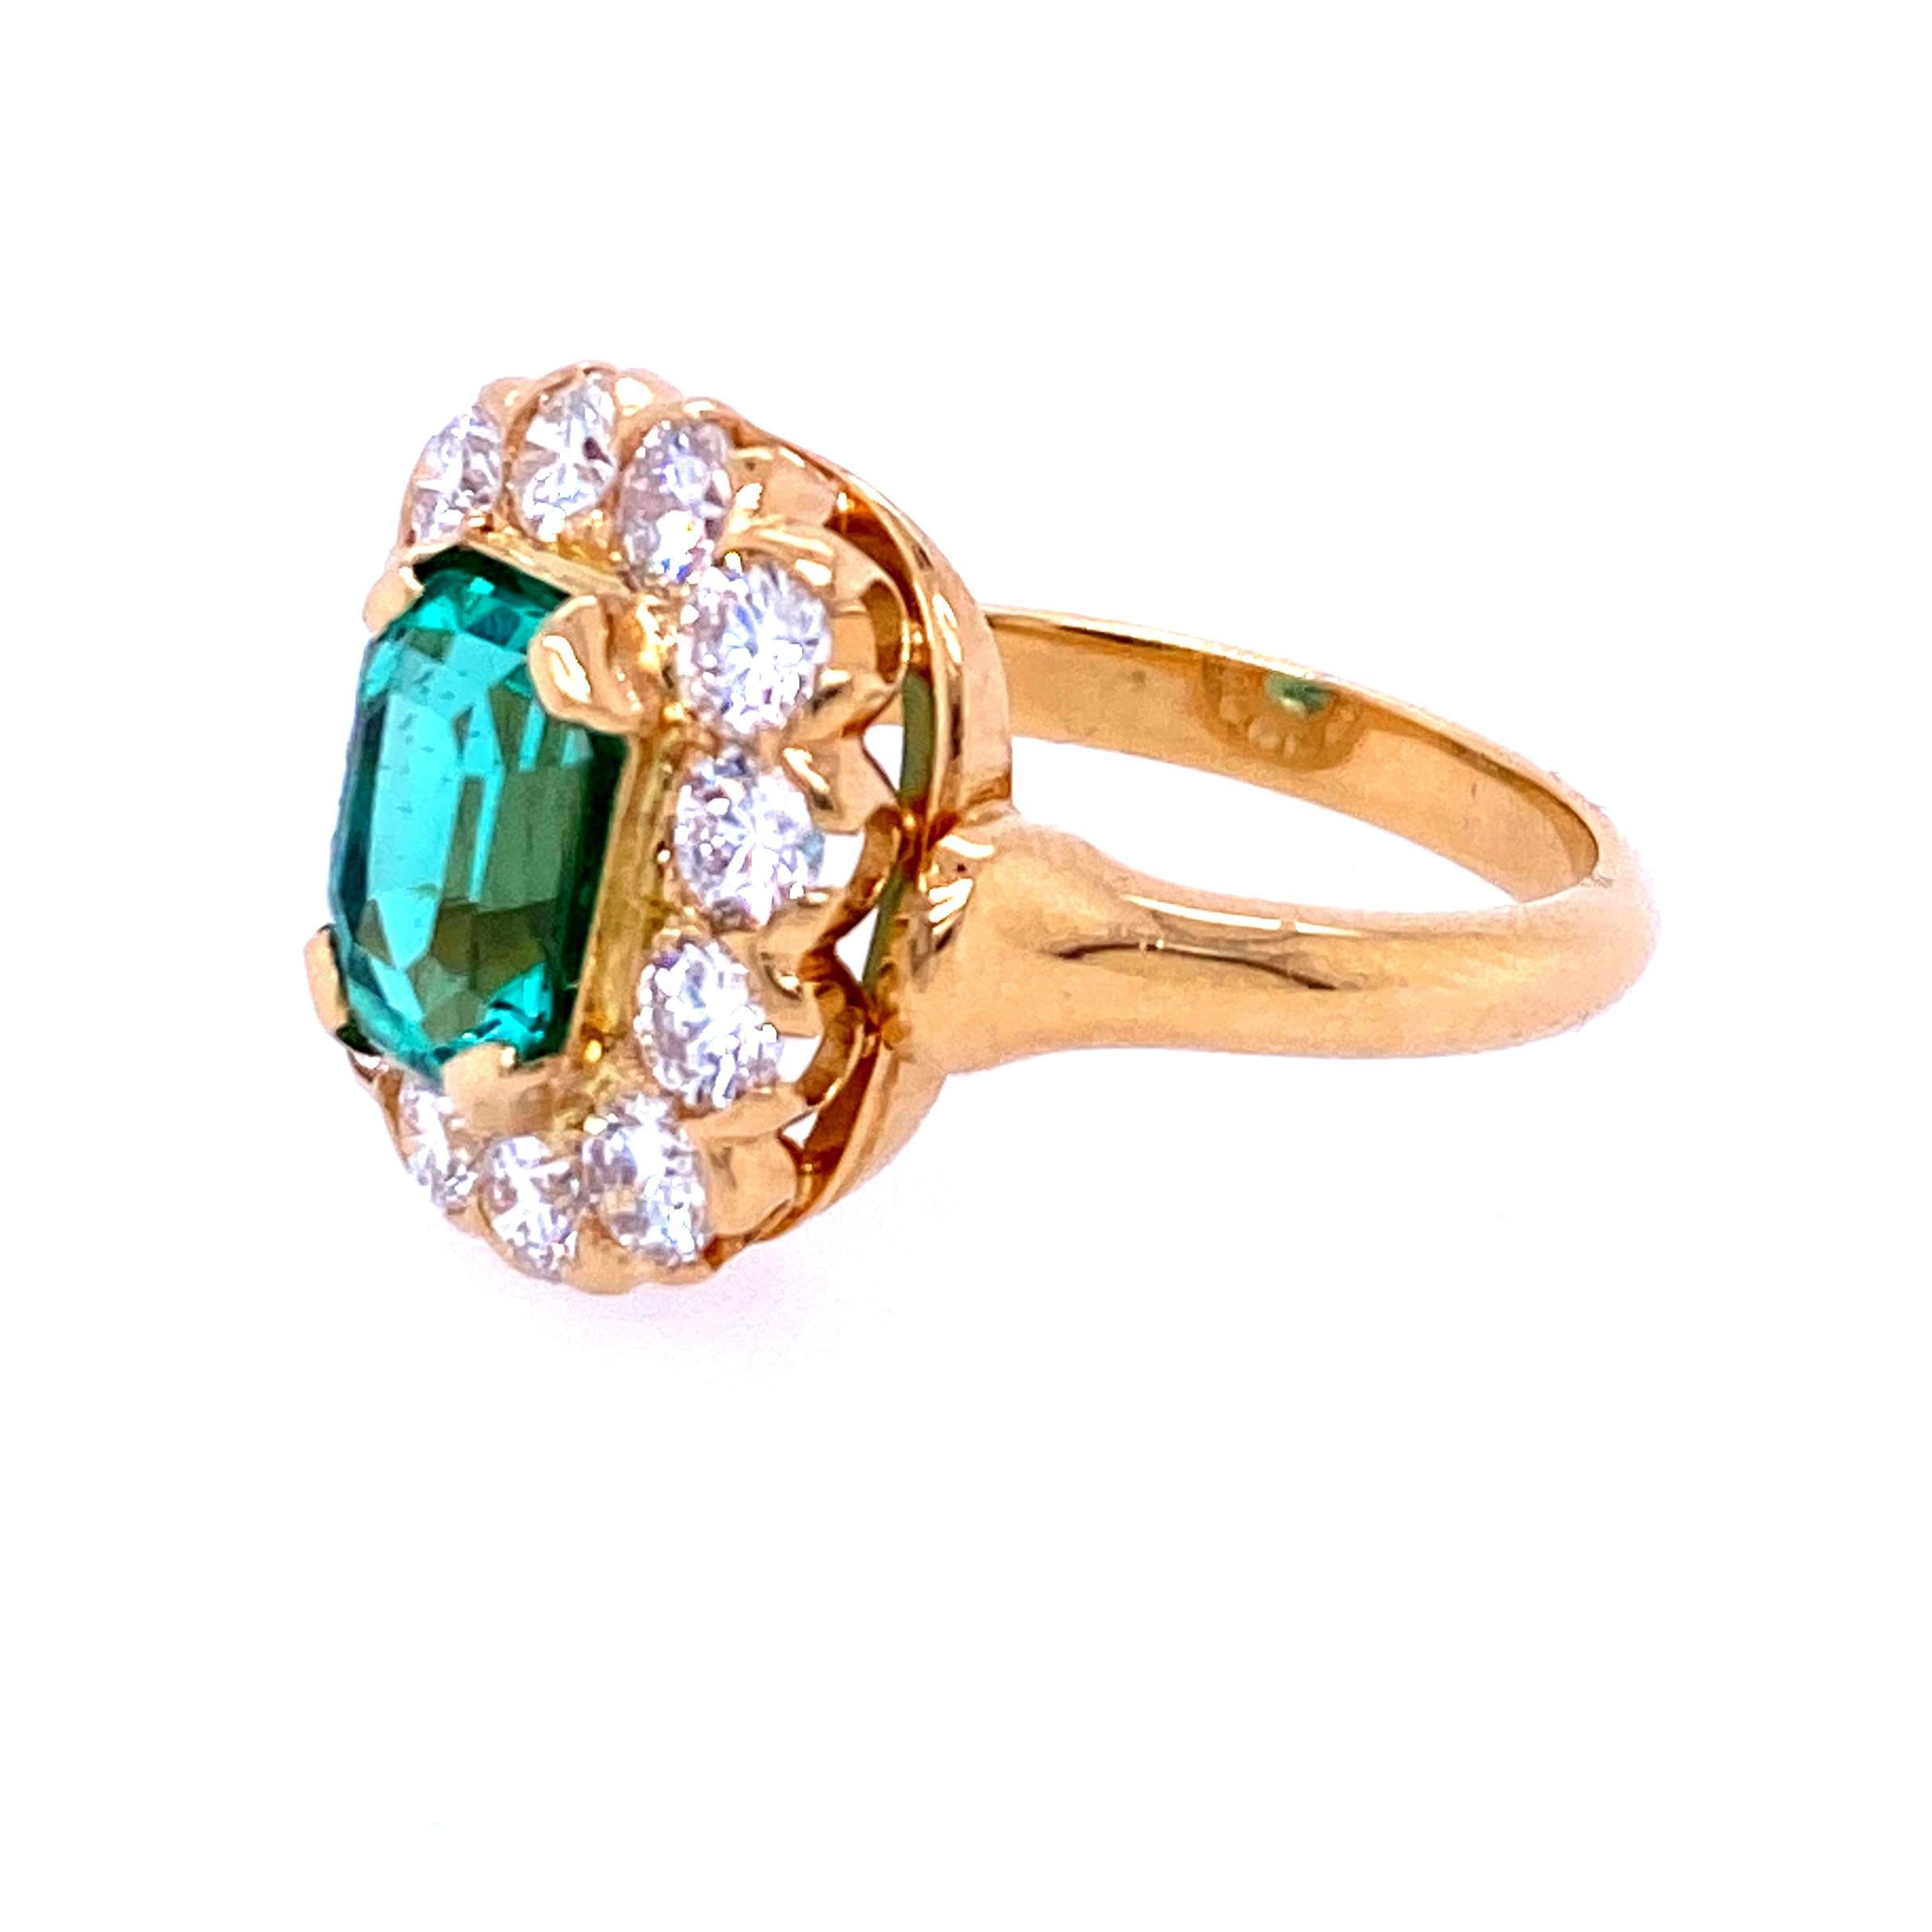 Emerald Cut Colombian Emerald and Diamond Ring